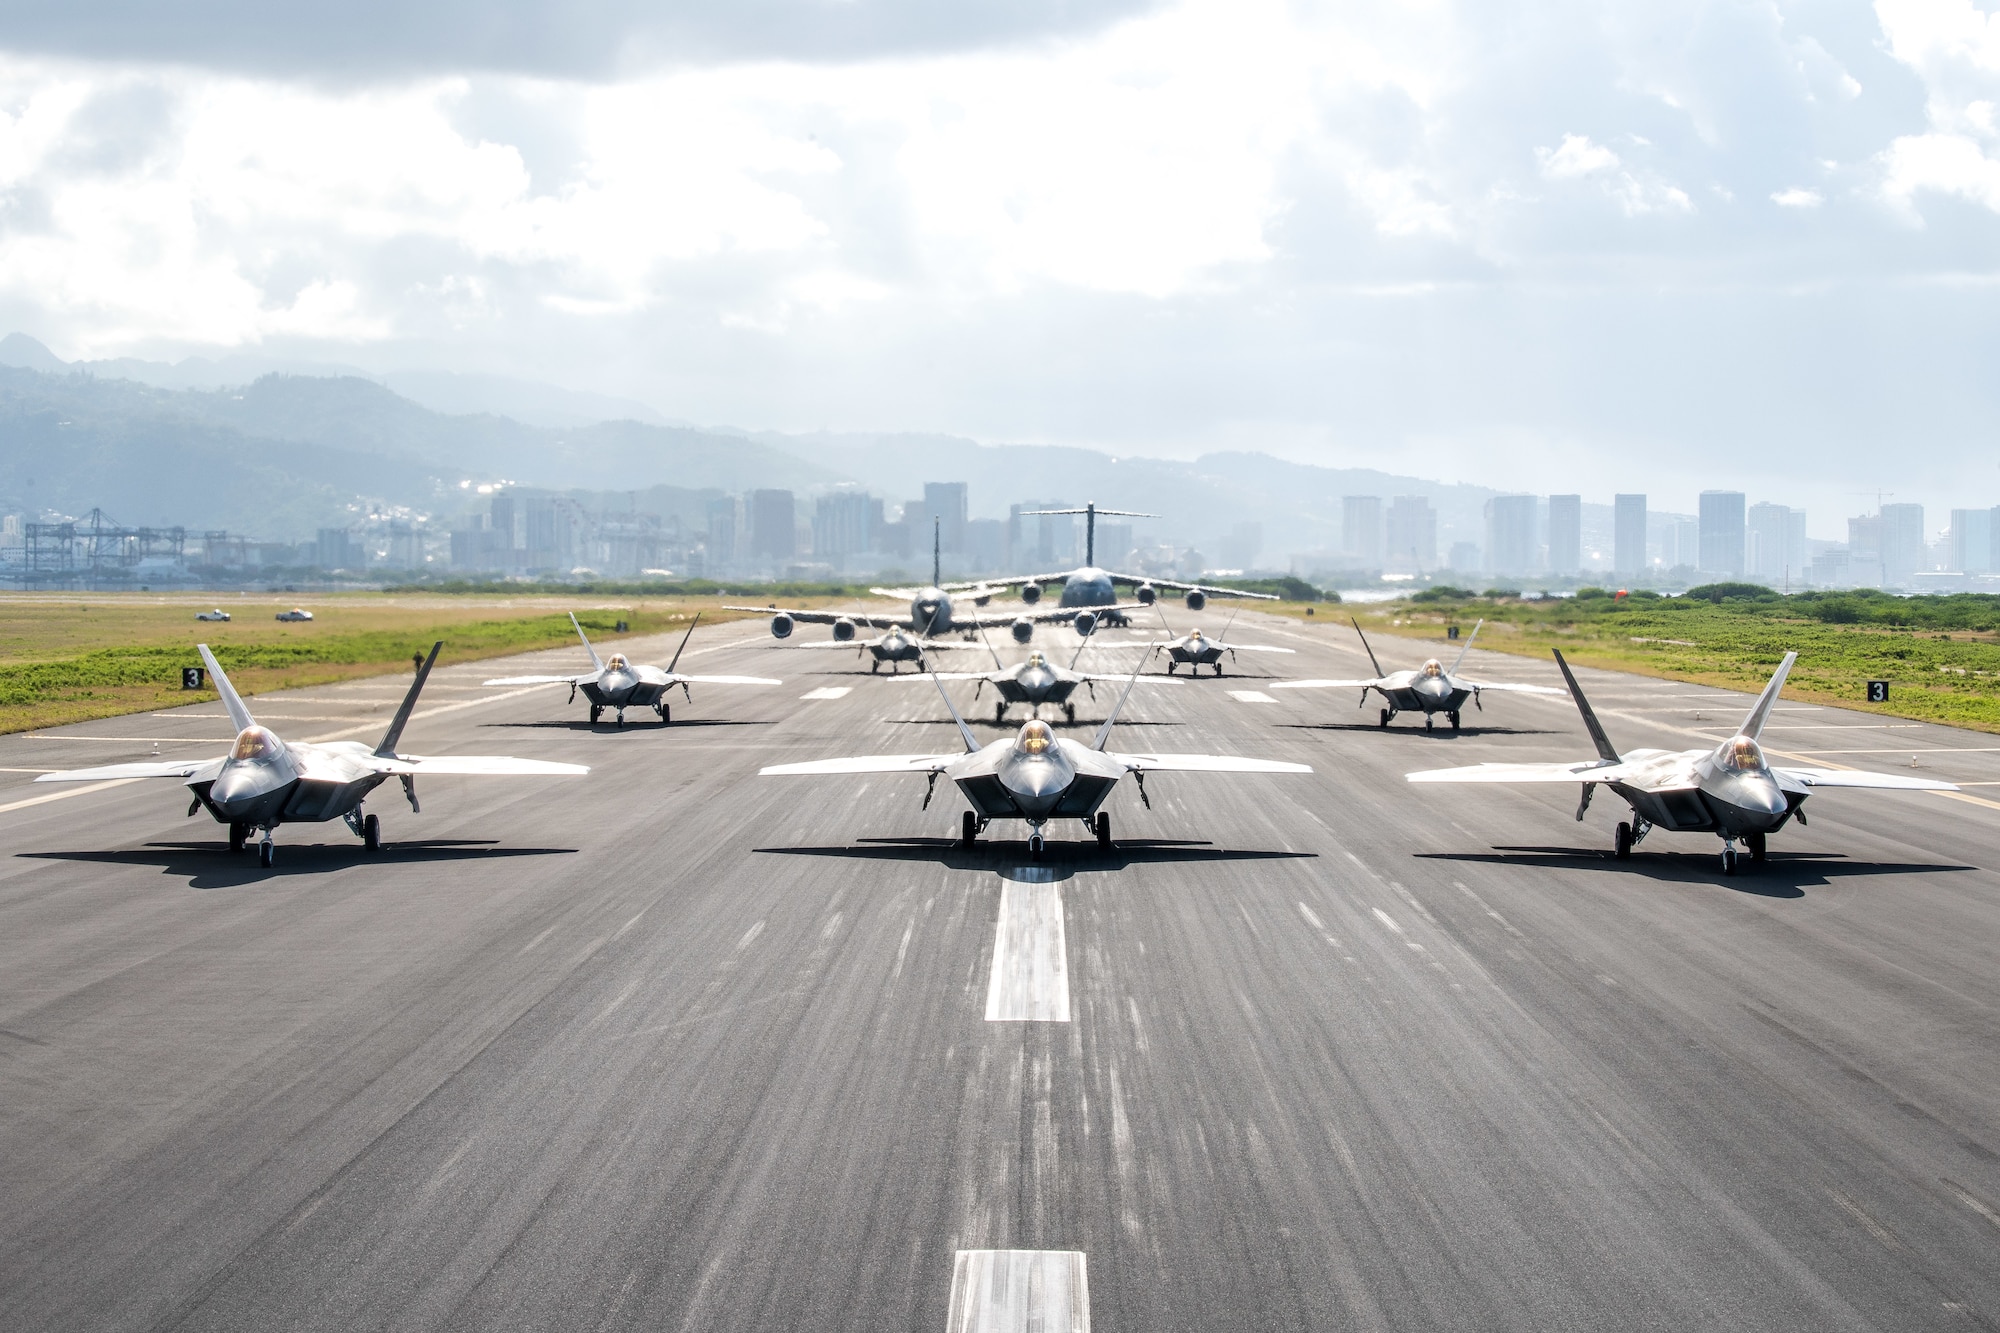 Eight U.S. Air Force F-22 Raptors, a KC-135 Stratotanker and a C-17 Globemaster III taxi on the runway during a routine training schedule April 21, 2020, at Honolulu International Airport, Hawaii. Given the low traffic at the airport due to COVID-19 mitigation efforts, the active-duty 15th Wing and the Hawaii Air National Guard’s 154th Wing seized an opportunity to document the operation which showcases readiness and their unique Total Force Integration construct. The units of Team Hickam work together seamlessly to deliver combat airpower, tanker fuel, and humanitarian support and disaster relief across the Indo-Pacific. (U.S. Air National Guard photo by Senior Airman John Linzmeier)